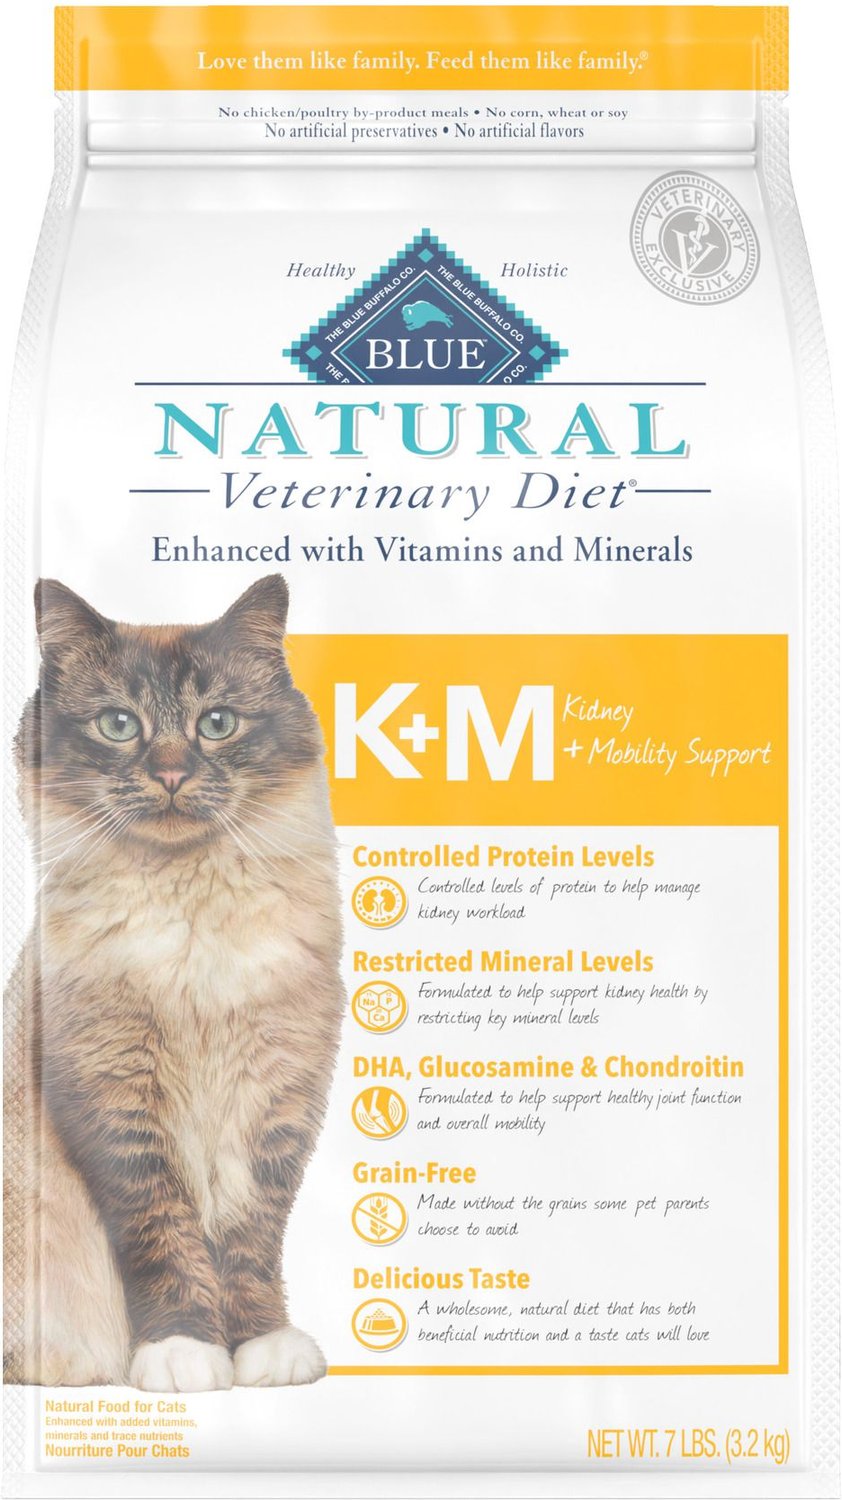 Blue Buffalo Natural Veterinary Diet K+M Kidney + Mobility Support